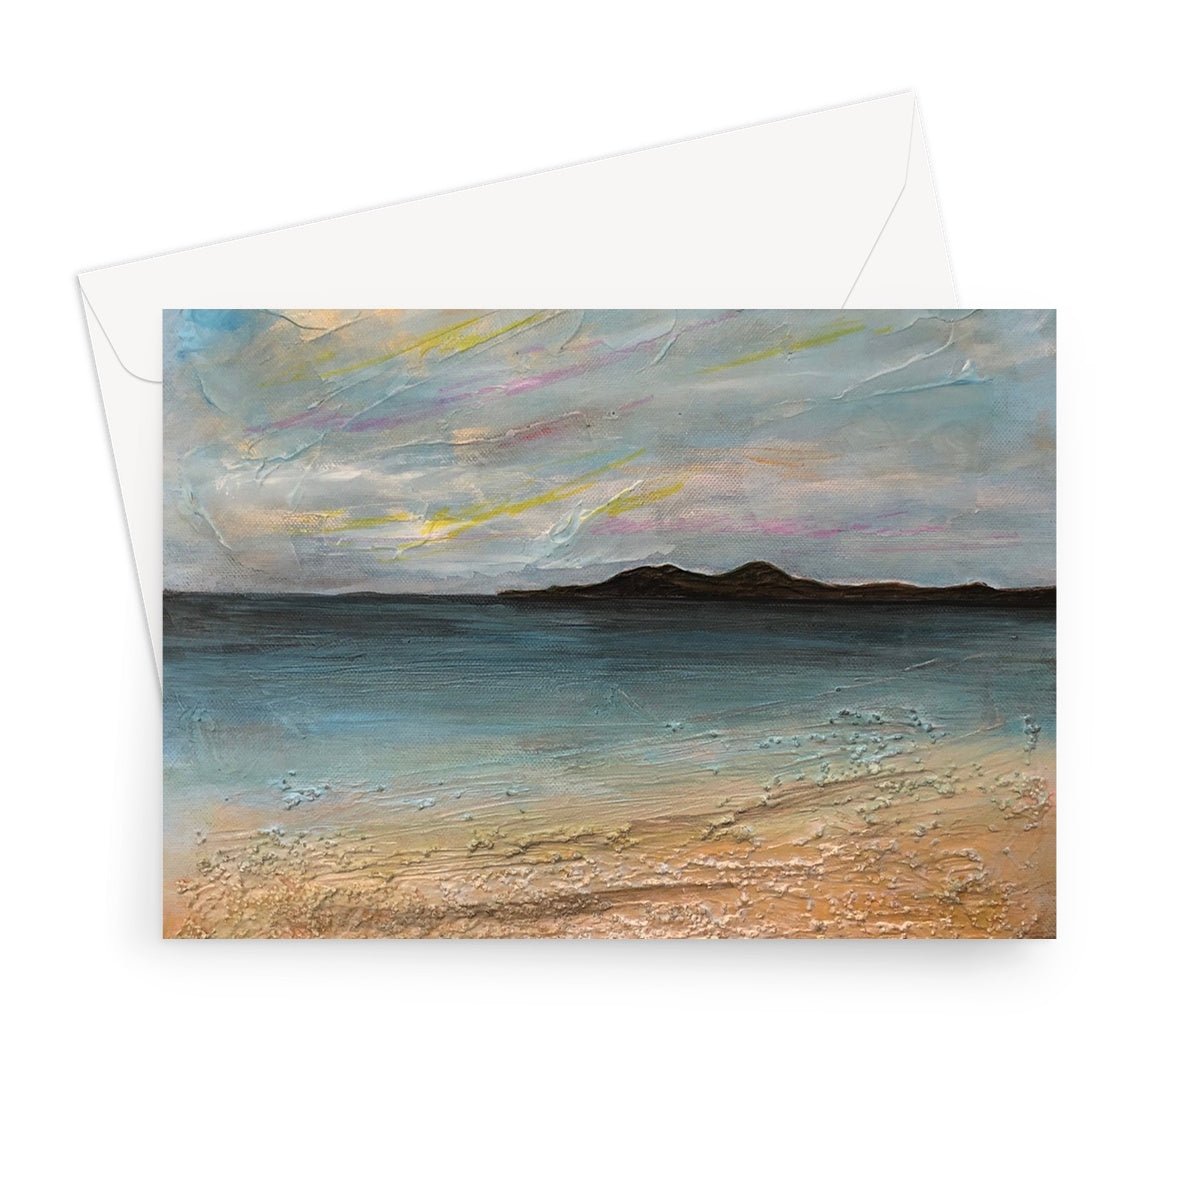 Garrynamonie Beach South Uist Art Gifts Greeting Card-Greetings Cards-Hebridean Islands Art Gallery-7"x5"-1 Card-Paintings, Prints, Homeware, Art Gifts From Scotland By Scottish Artist Kevin Hunter